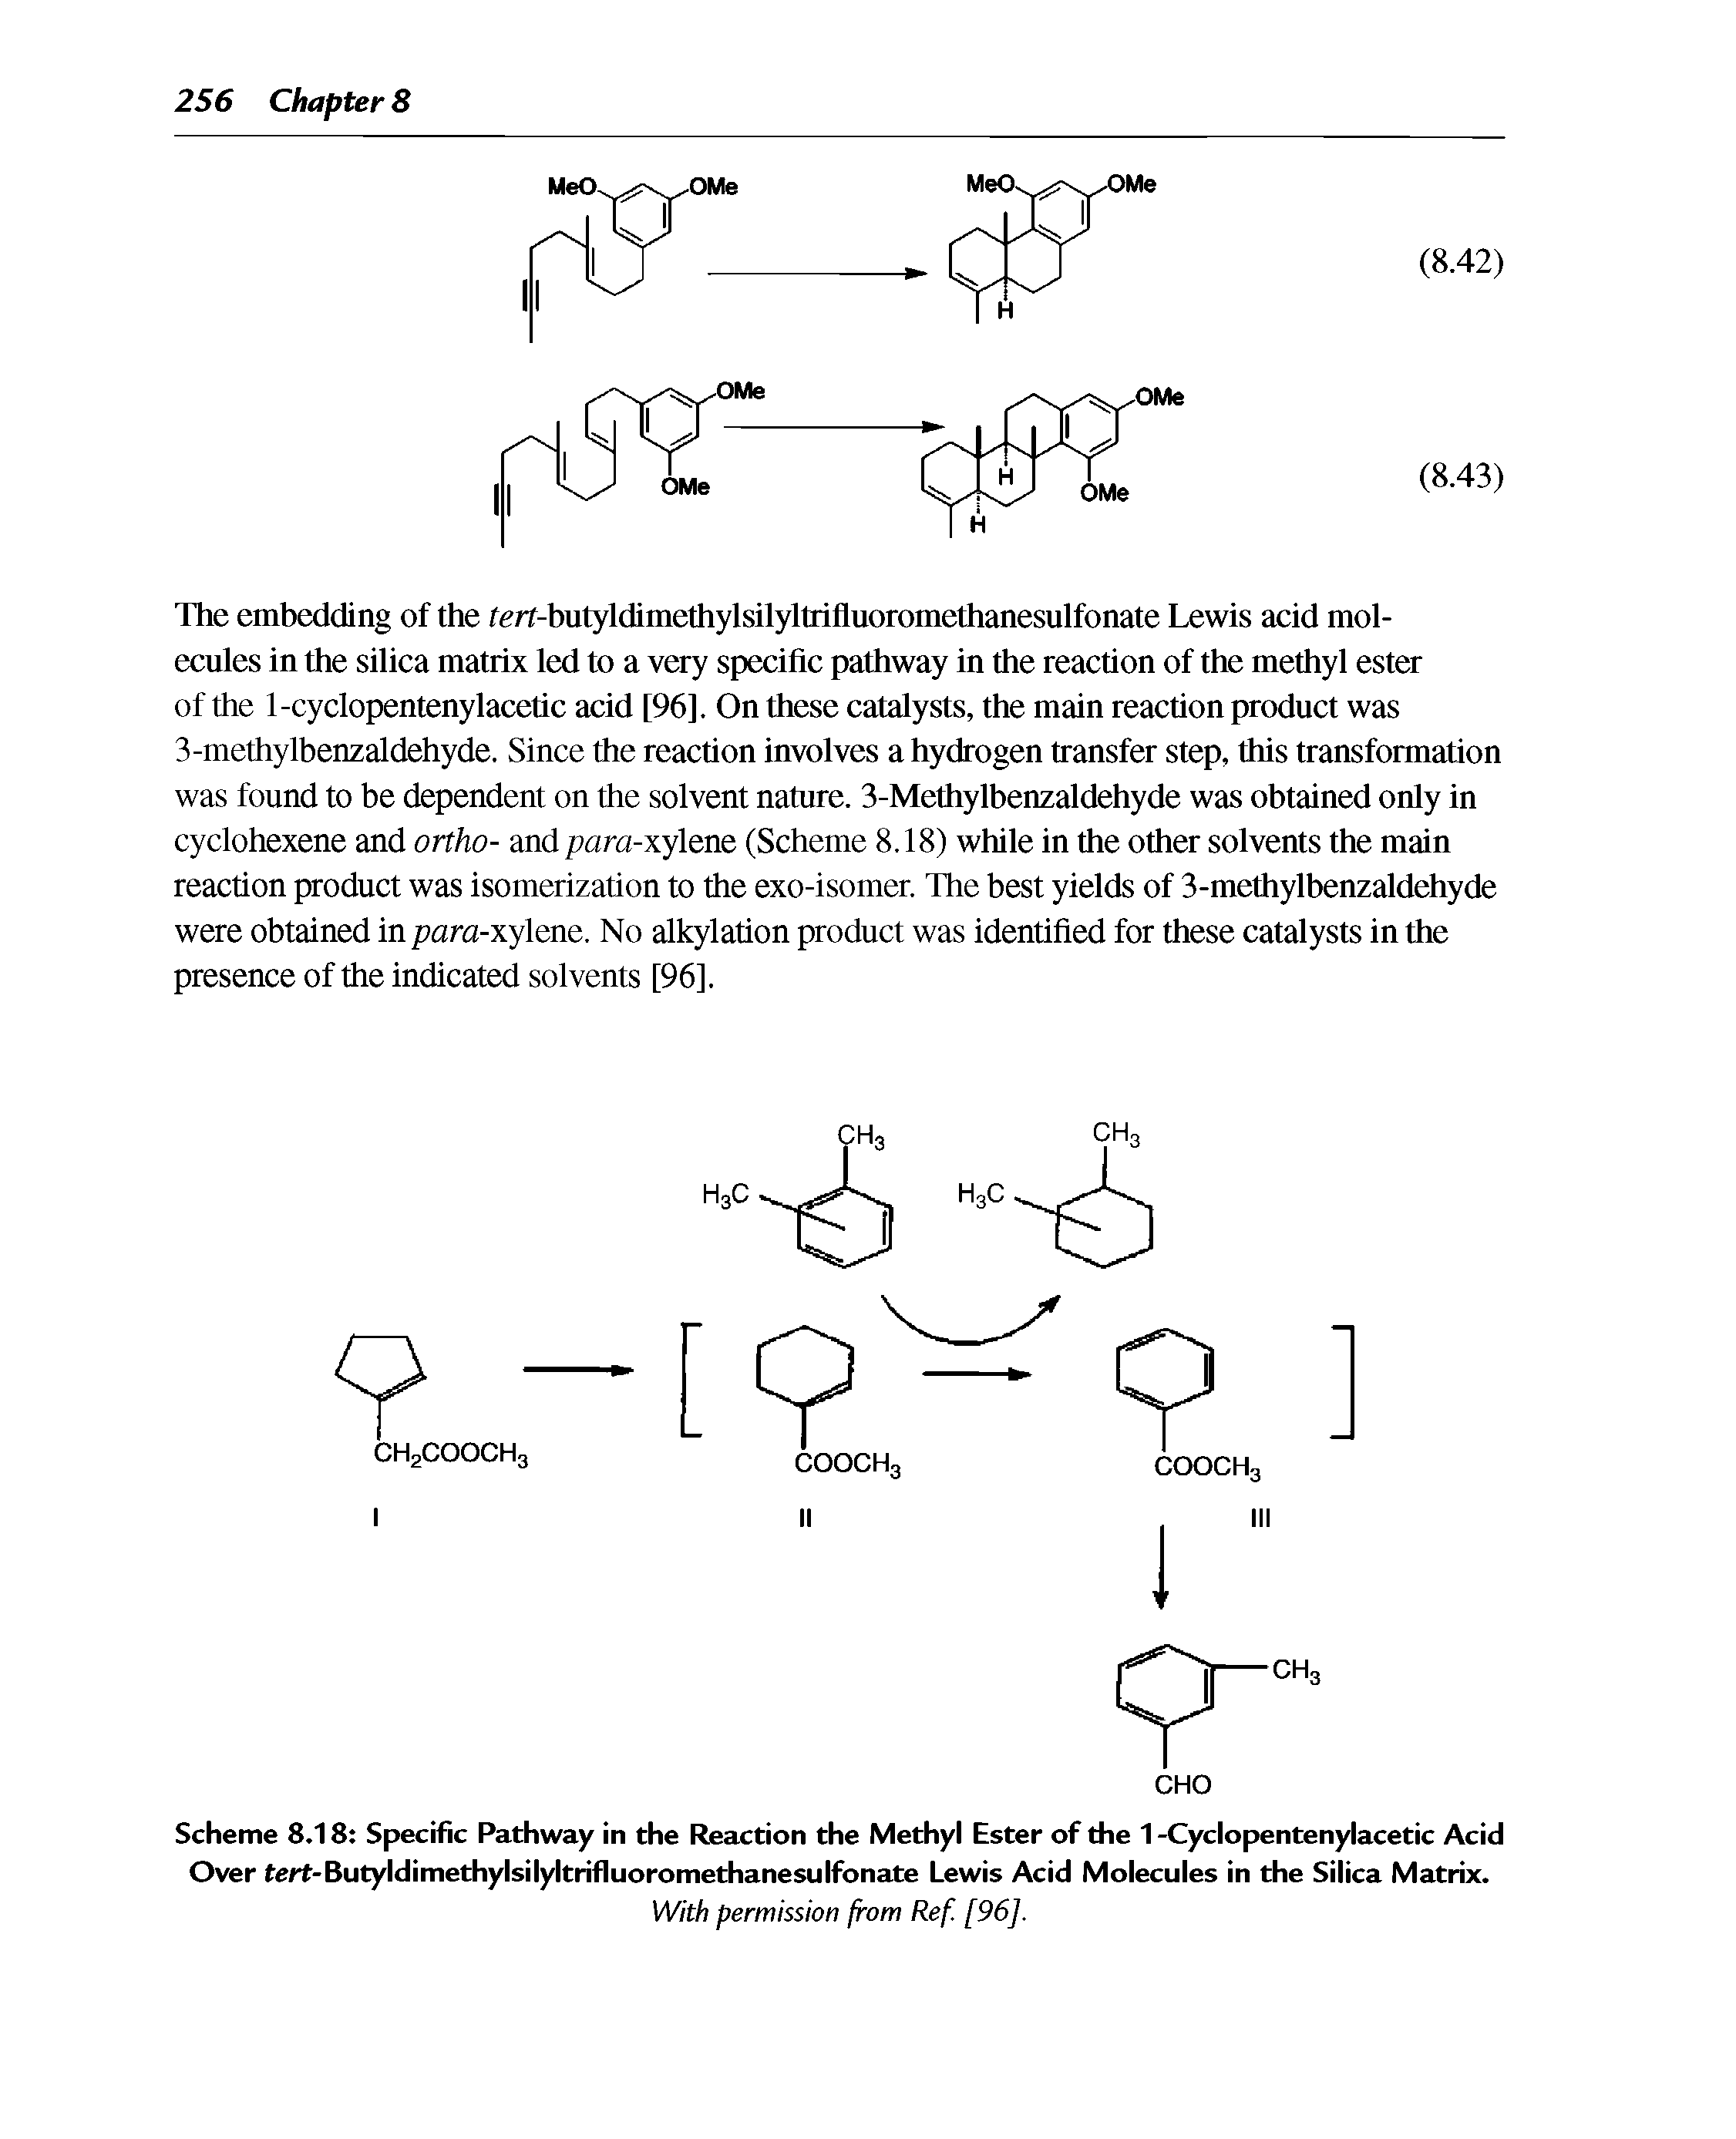 Scheme 8.18 Sp>ecific Pathway in the Reaction the Methyl Ester of the 1 -Cyclop>entenylacetic Acid Over tert-ButyIdimethylsilyltrifluoromethanesulfonate Lewis Acid Molecules in the Silica Matrix.